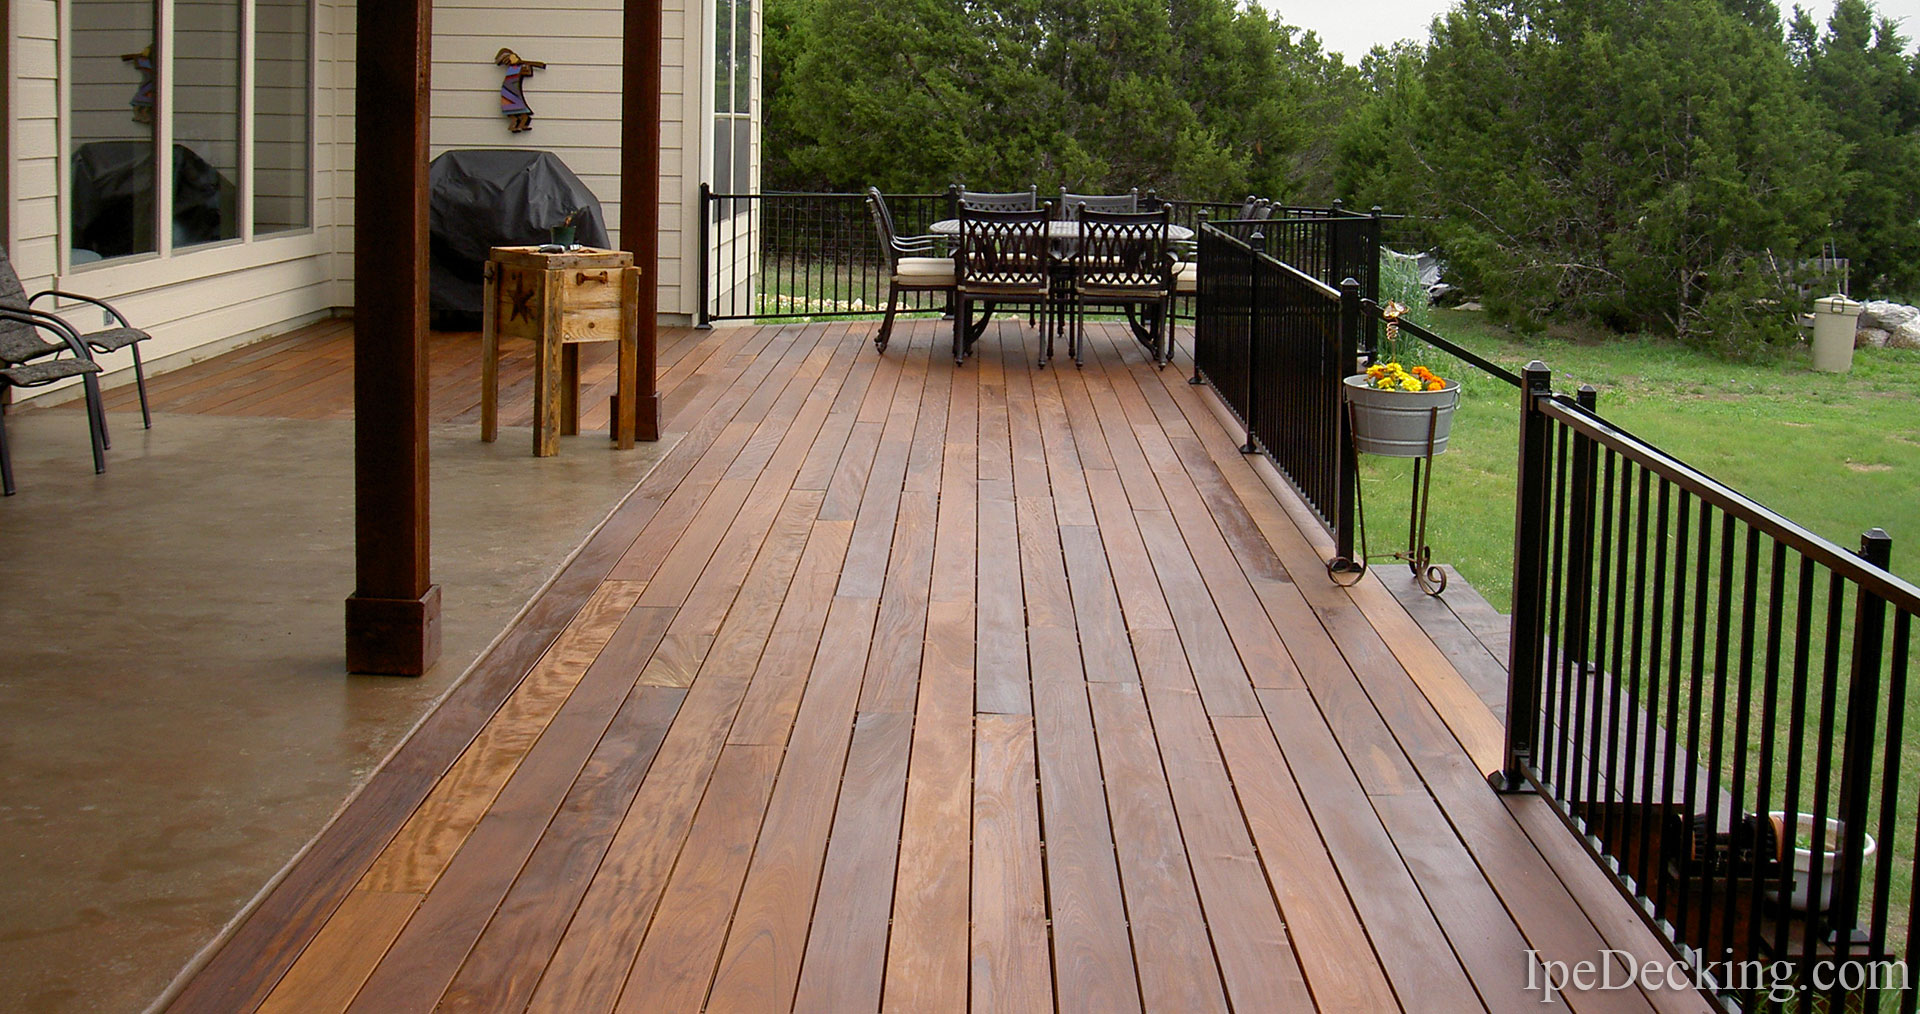 What Is Ipe Decking